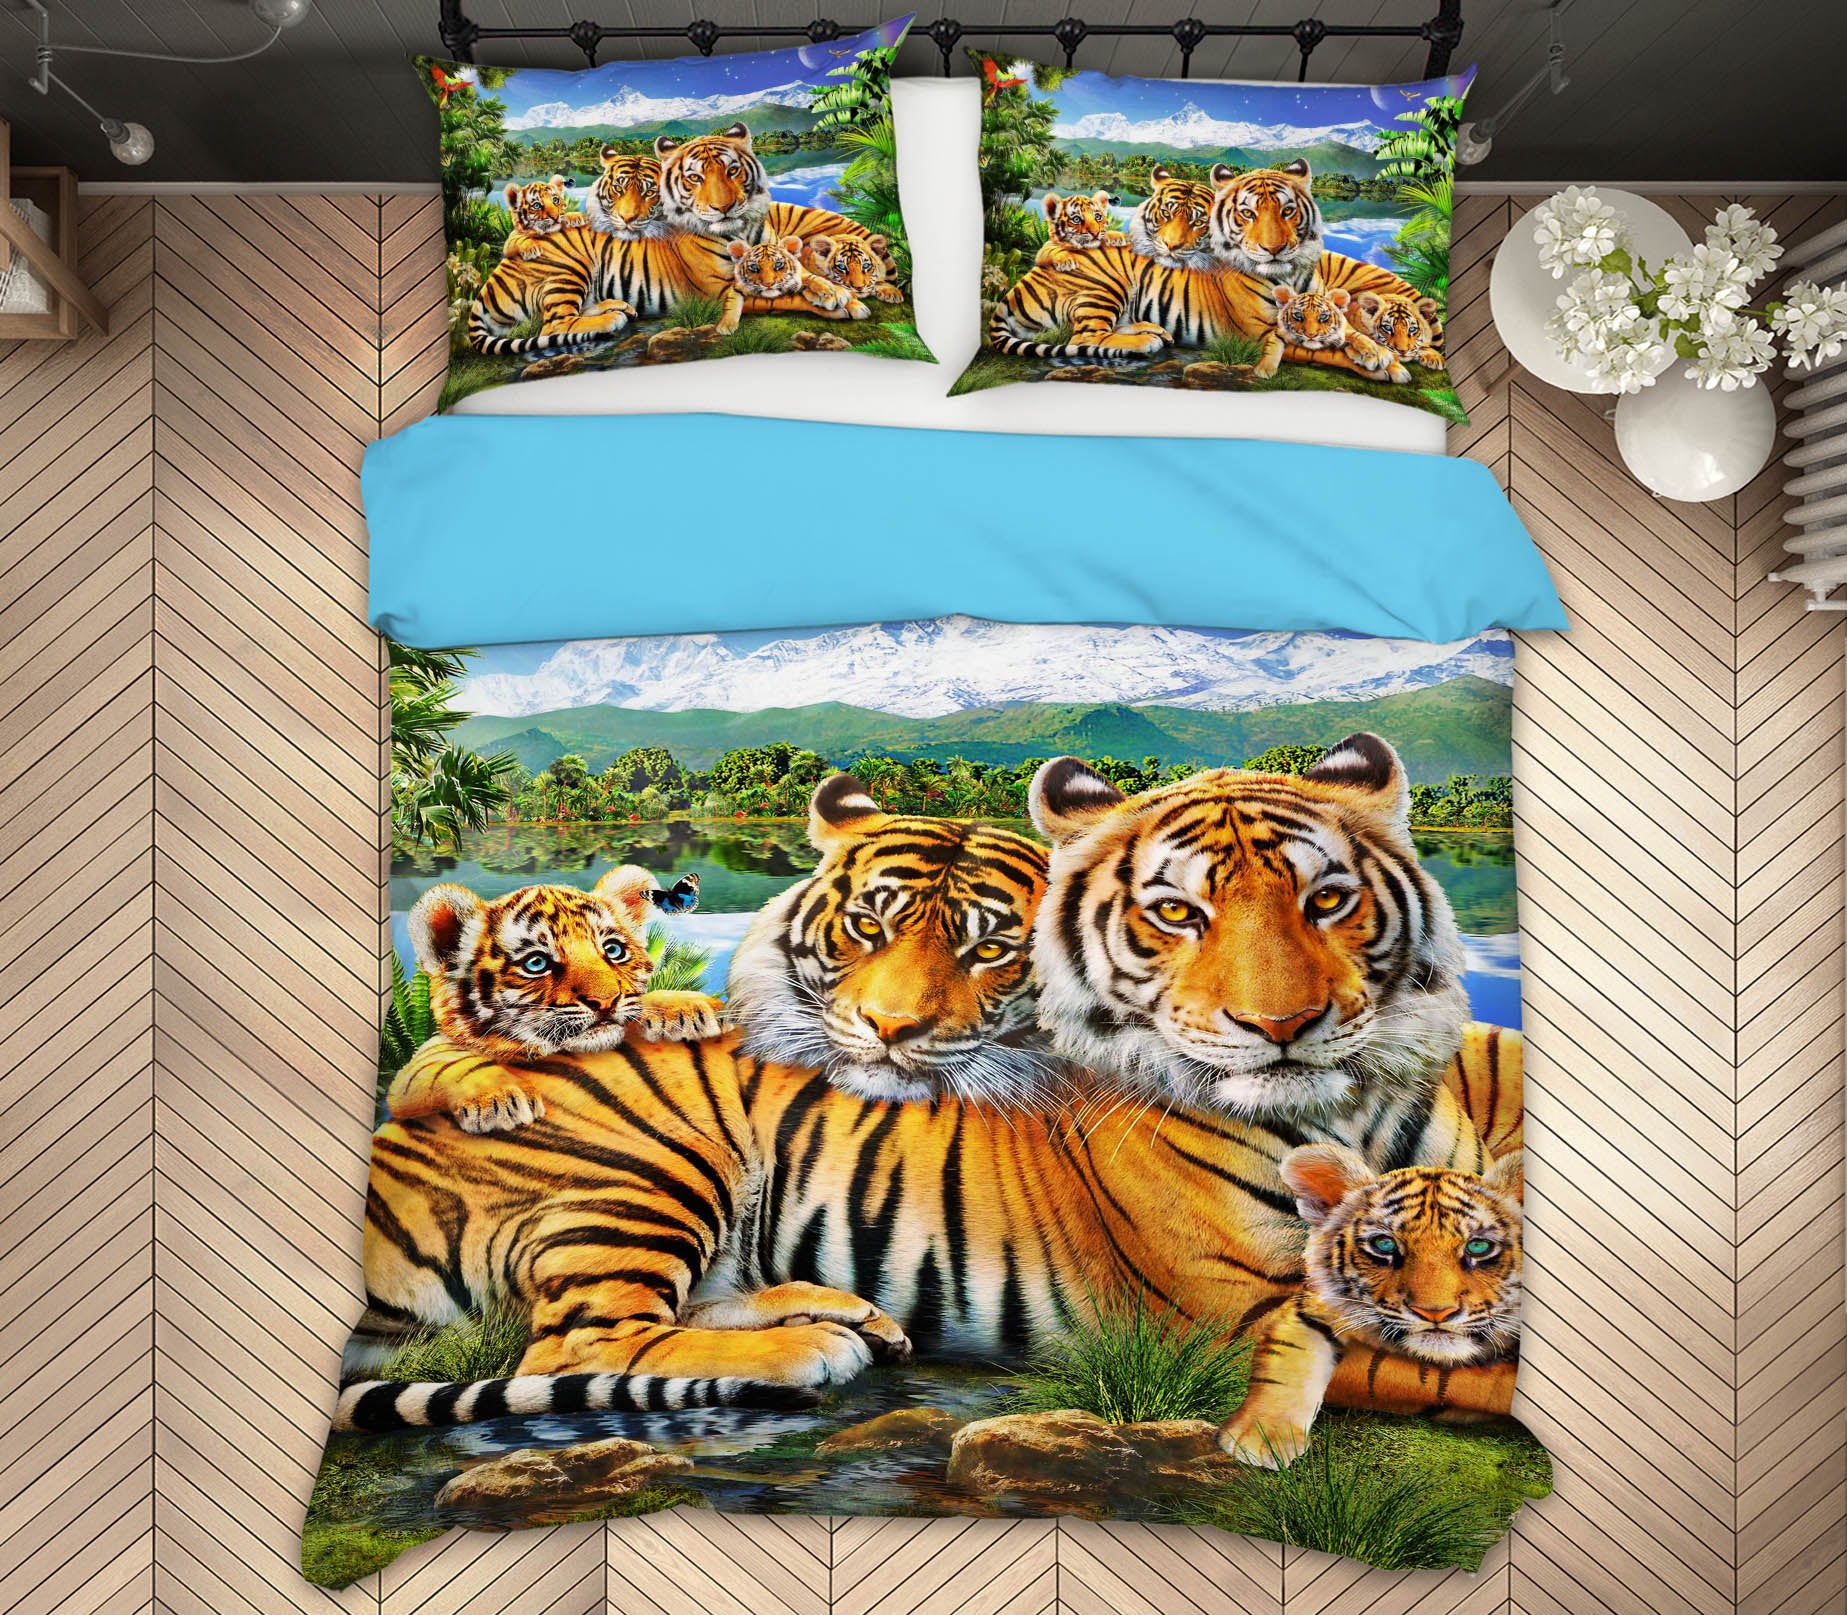 3D Loving Tigers 2041 Adrian Chesterman Bedding Bed Pillowcases Quilt